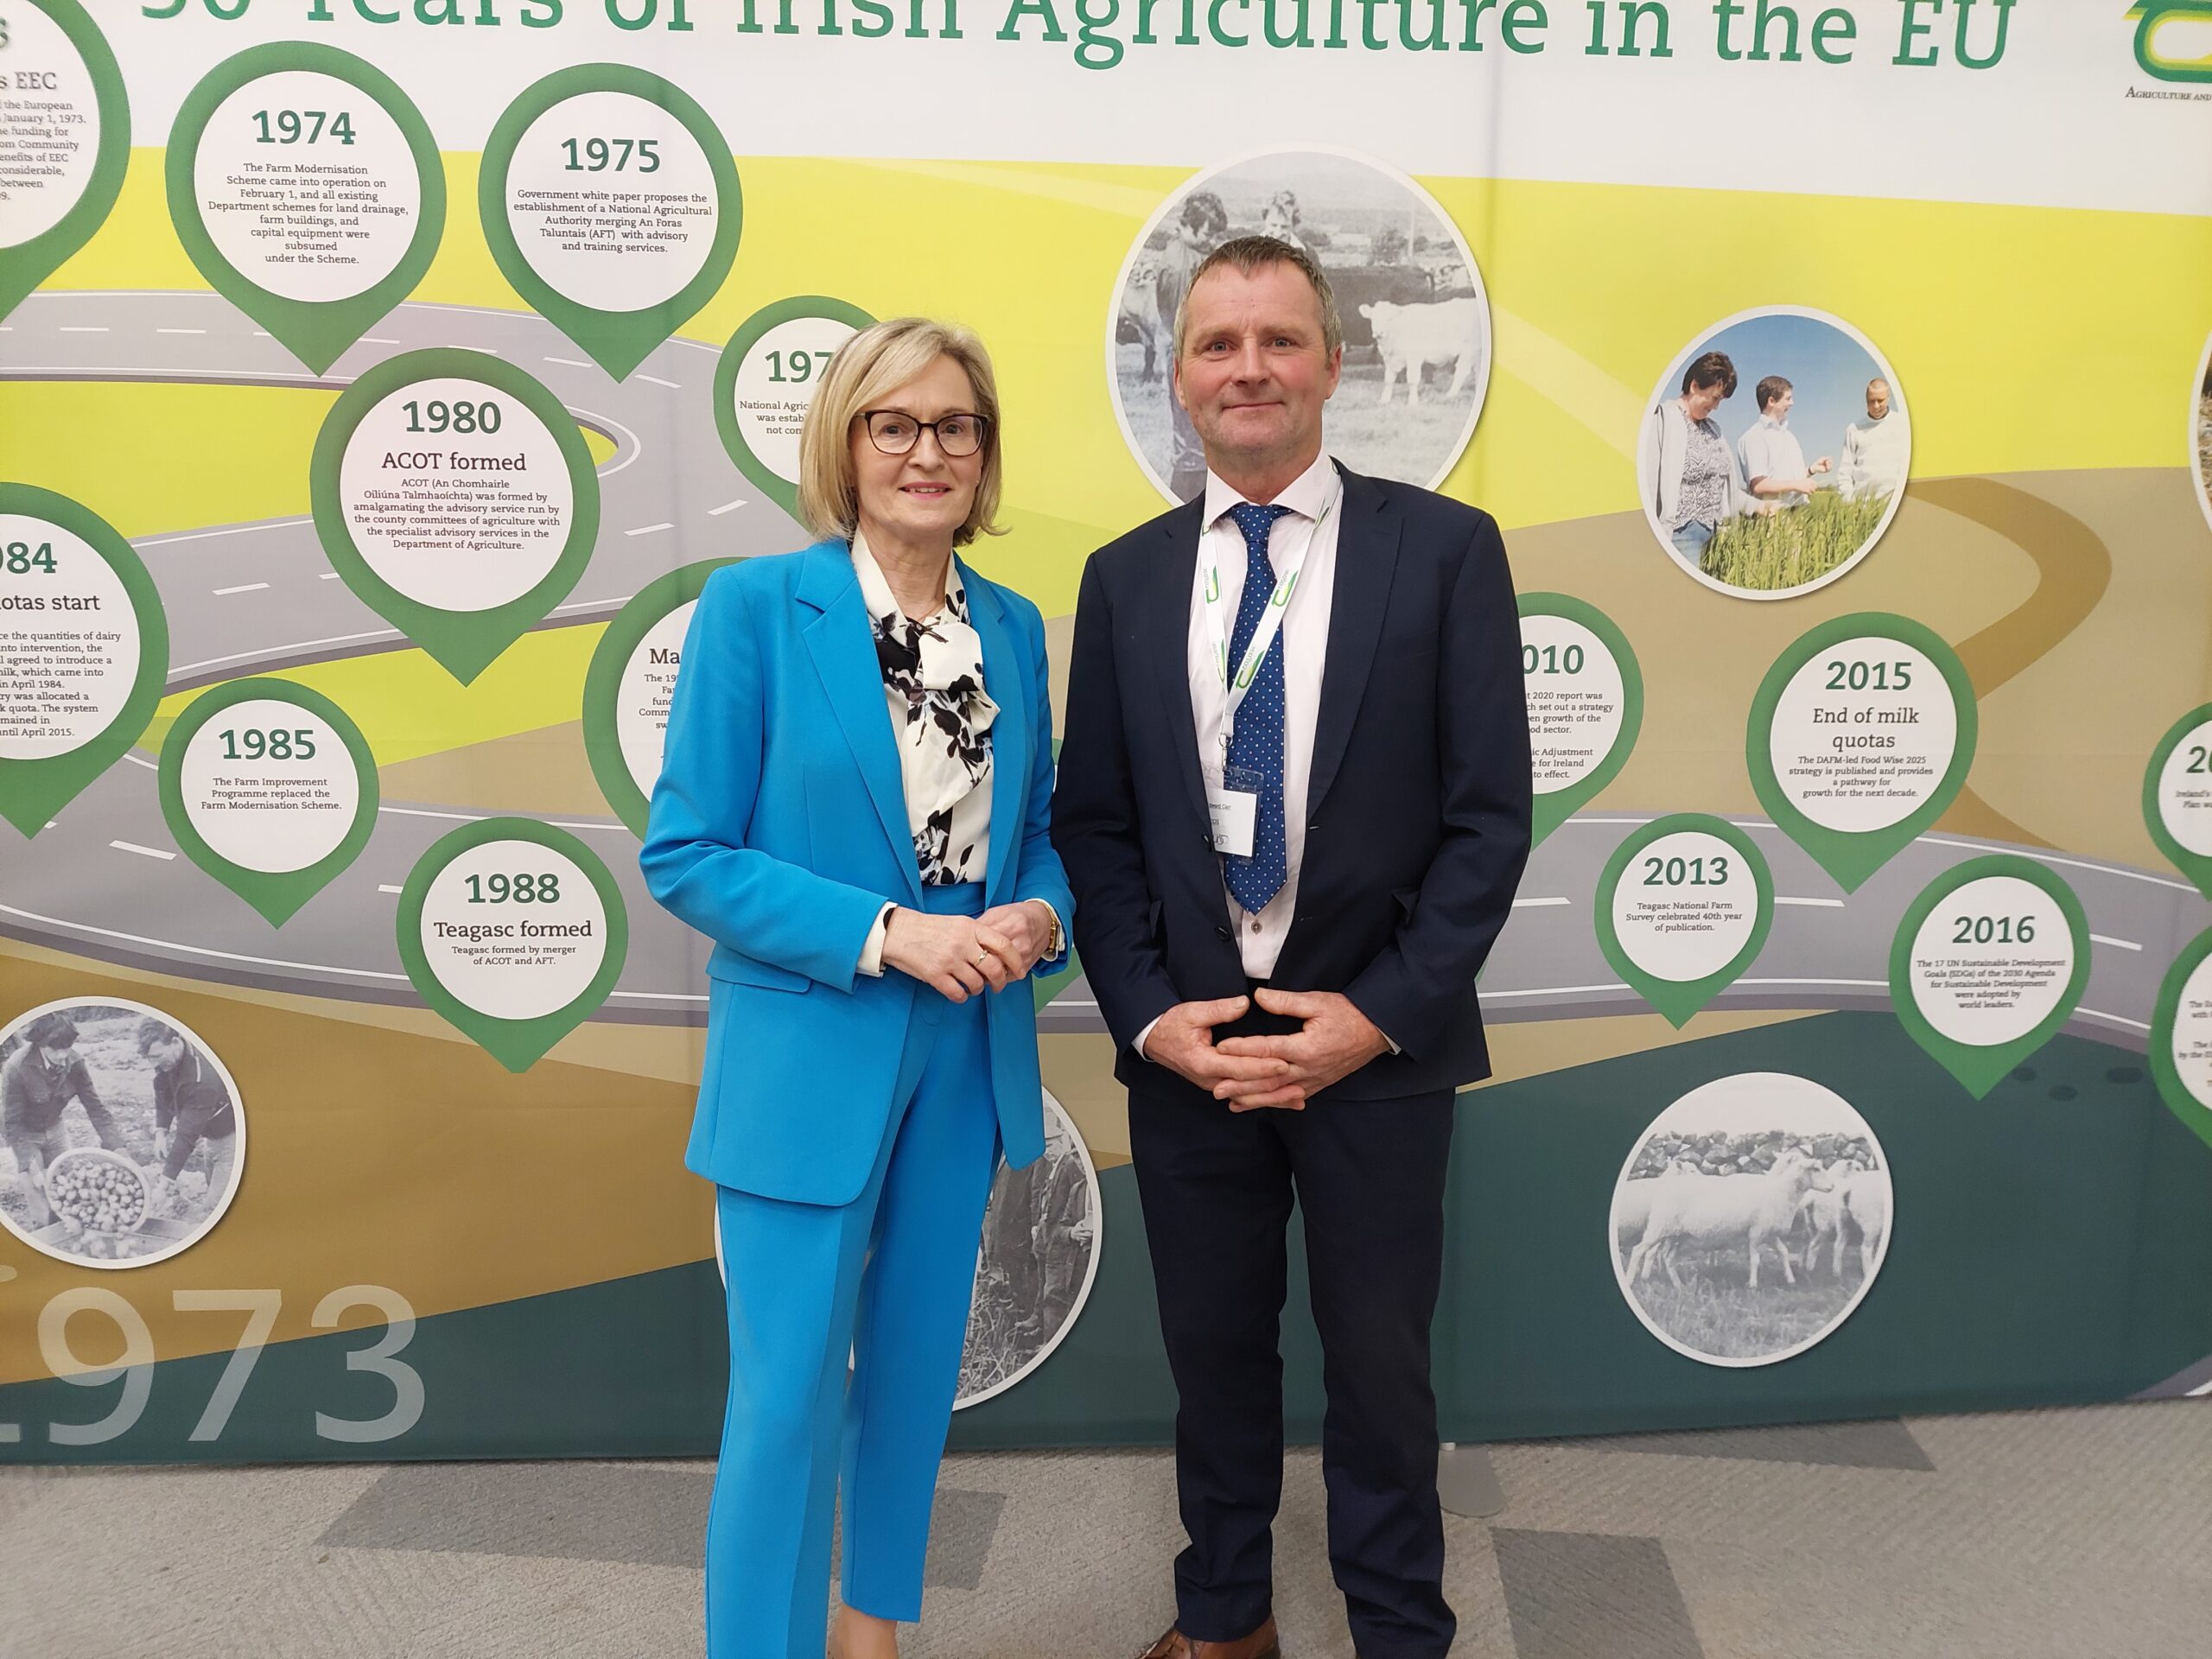 Commissioner Mairead McGuinness and Edward Carr at Teagasc 50th